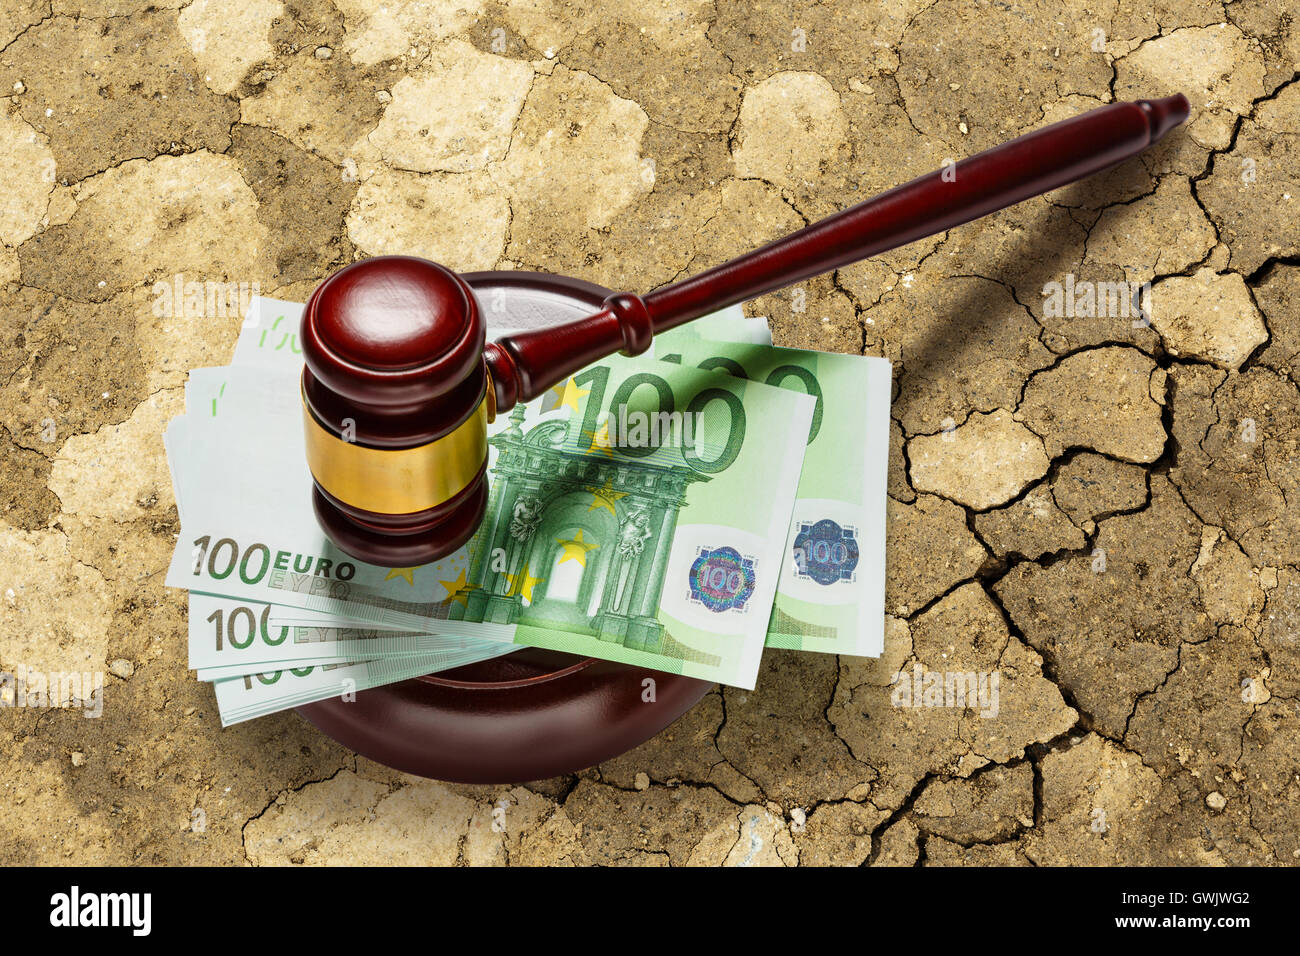 Wooden judge's gavel and one hundred euro banknotes Stock Photo